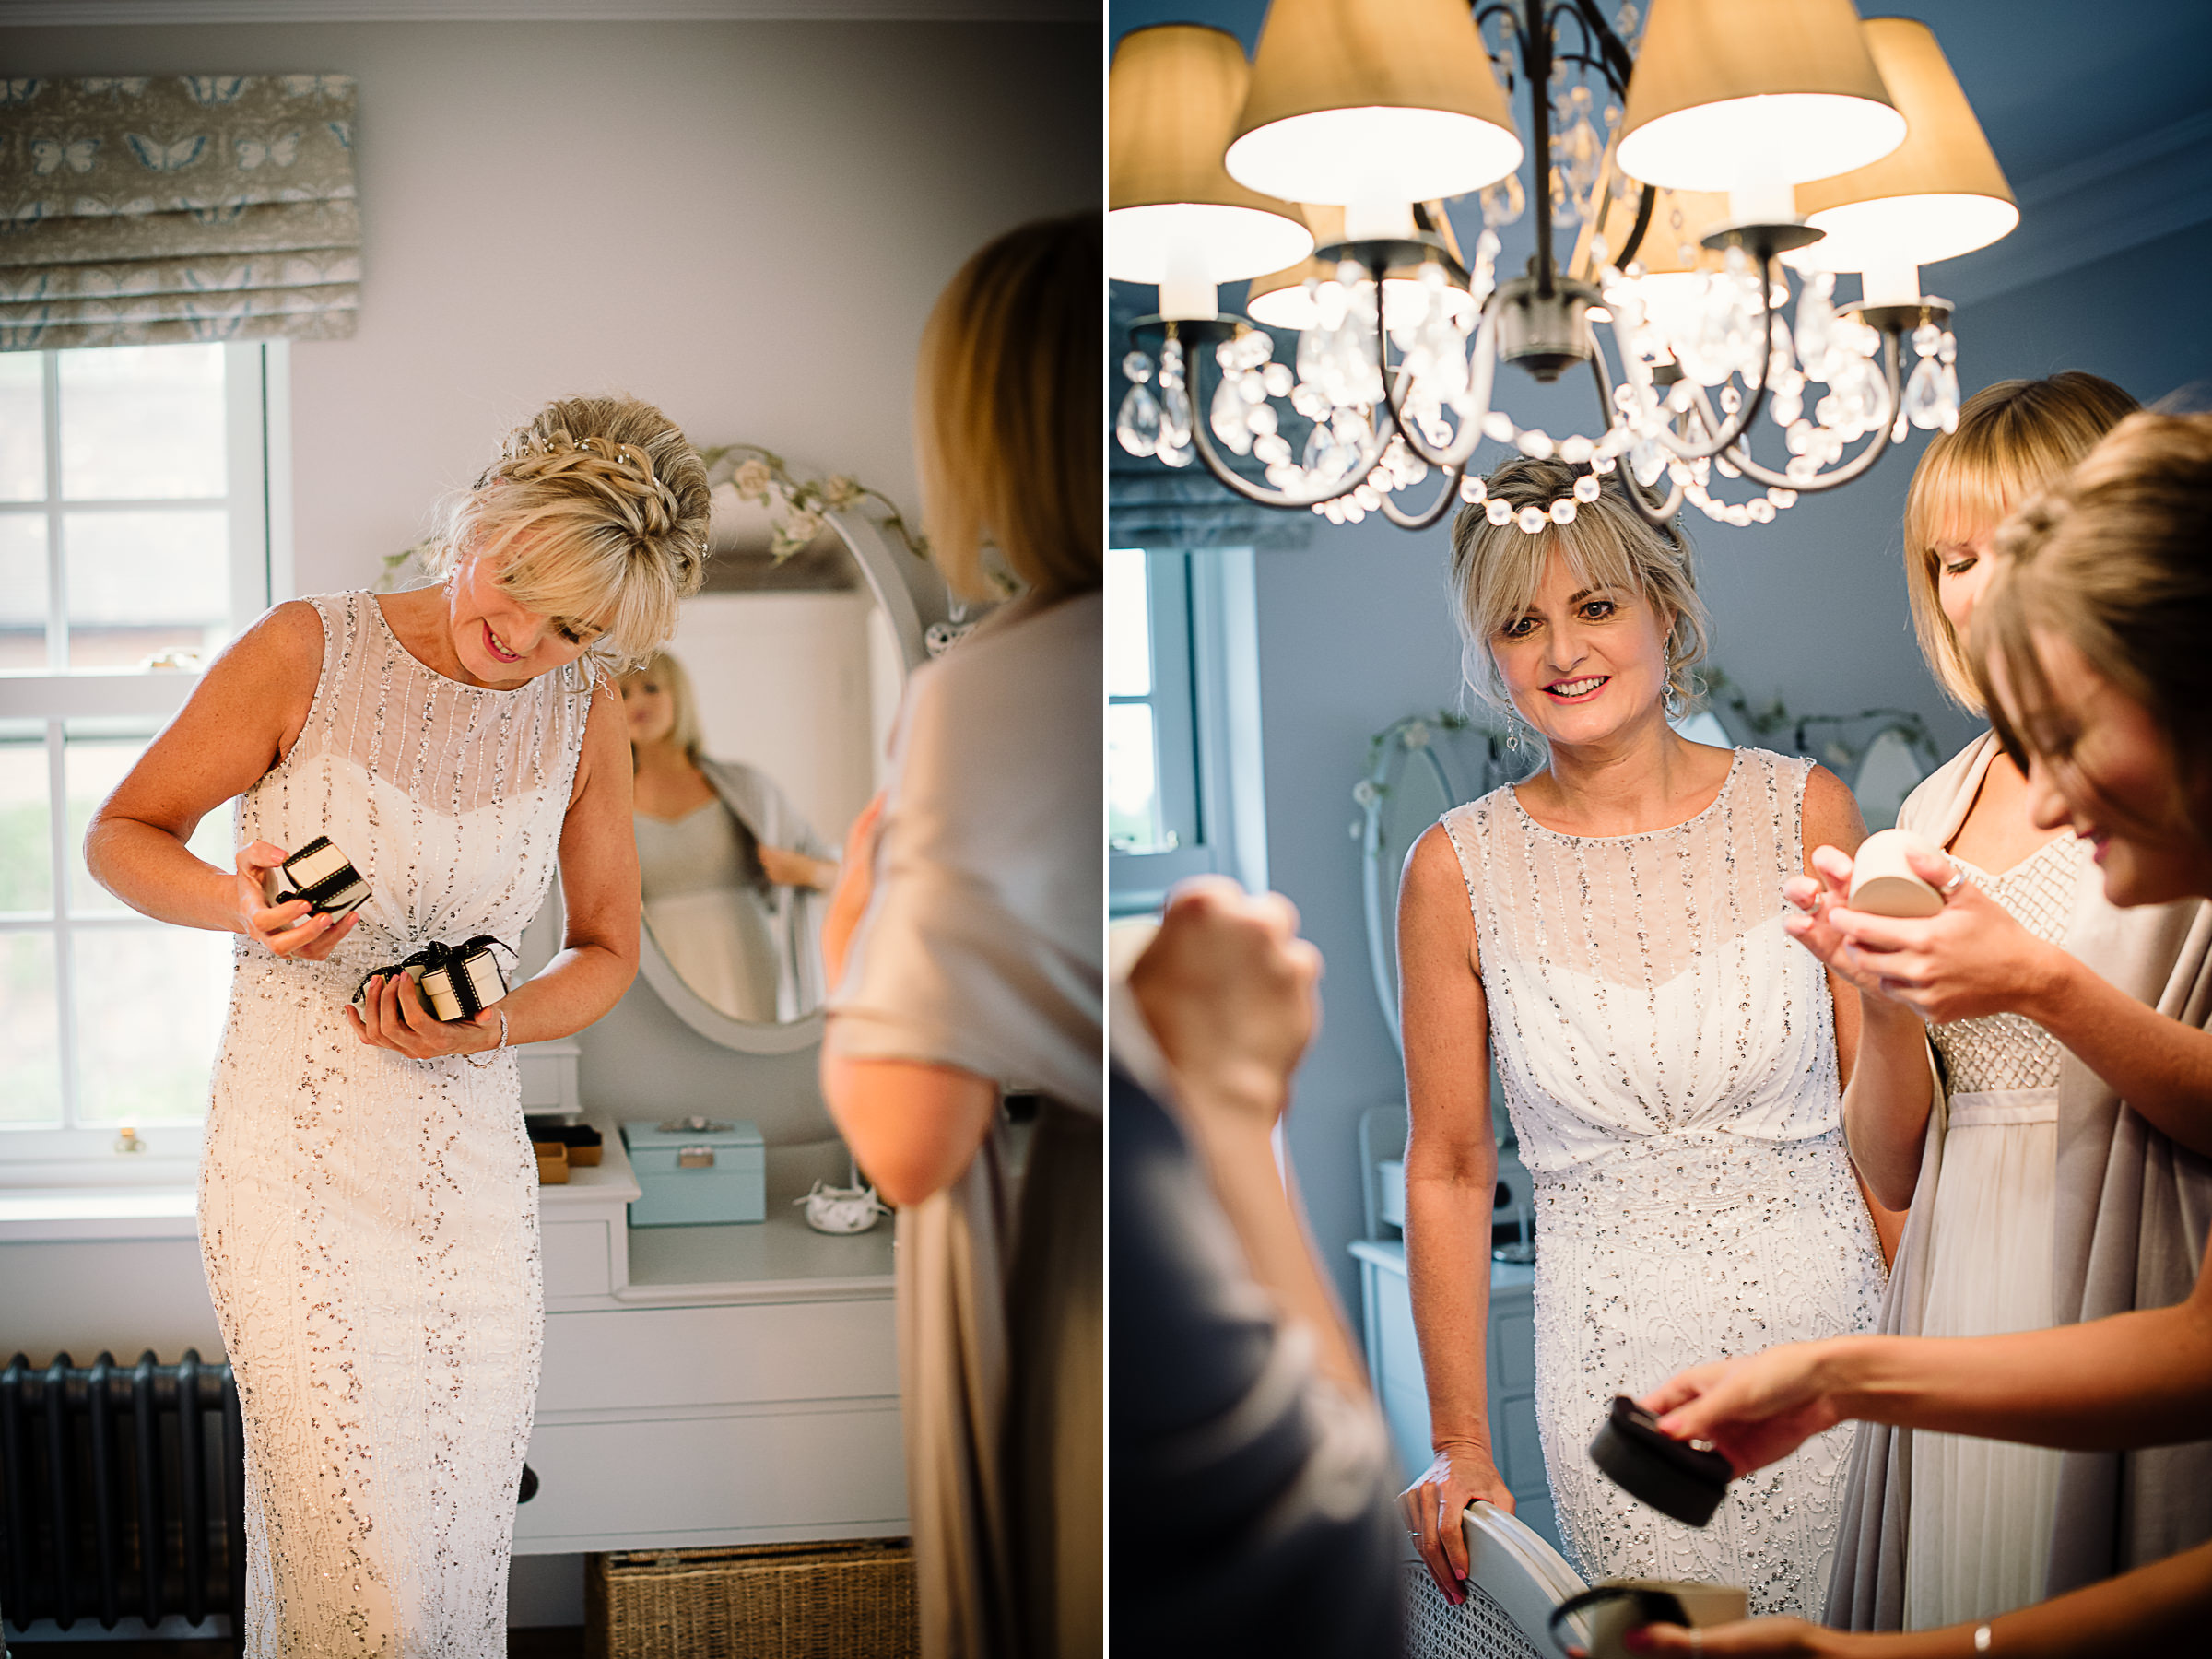 Hertfordshire wedding photographer captures bride giving out presents to bridesmaids